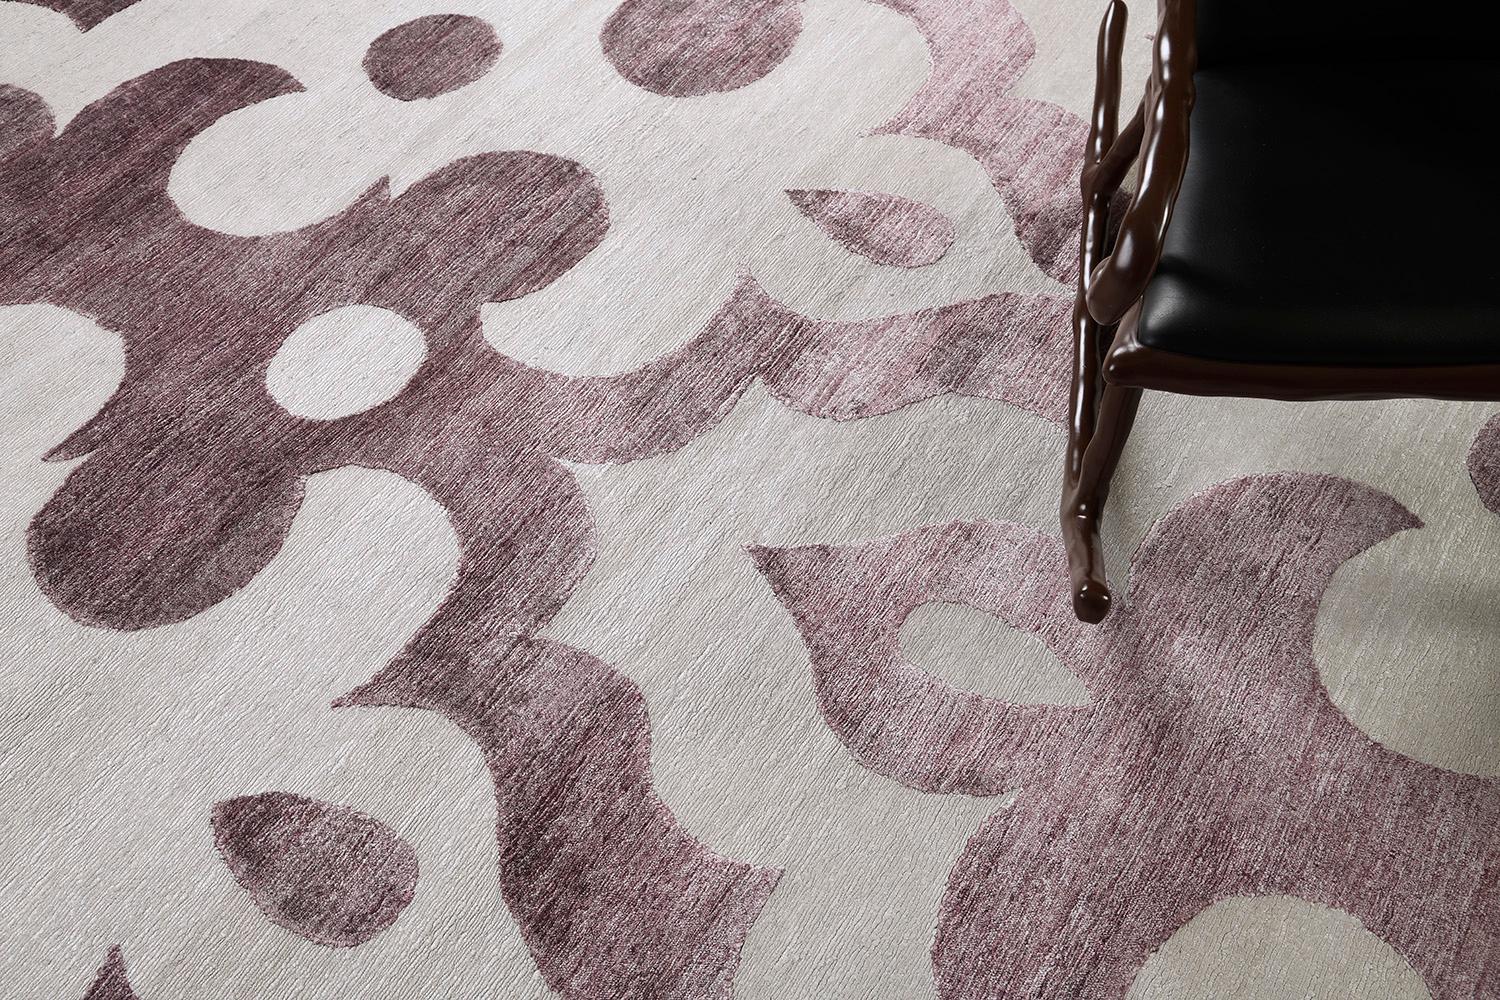 Moresco' features a stunning embossed allover pattern that brings satisfying texture to the entirety of this mesmerizing rug. Muted tones of ivory and purple orchid complements the soothing character brought about this exquisite piece. With its